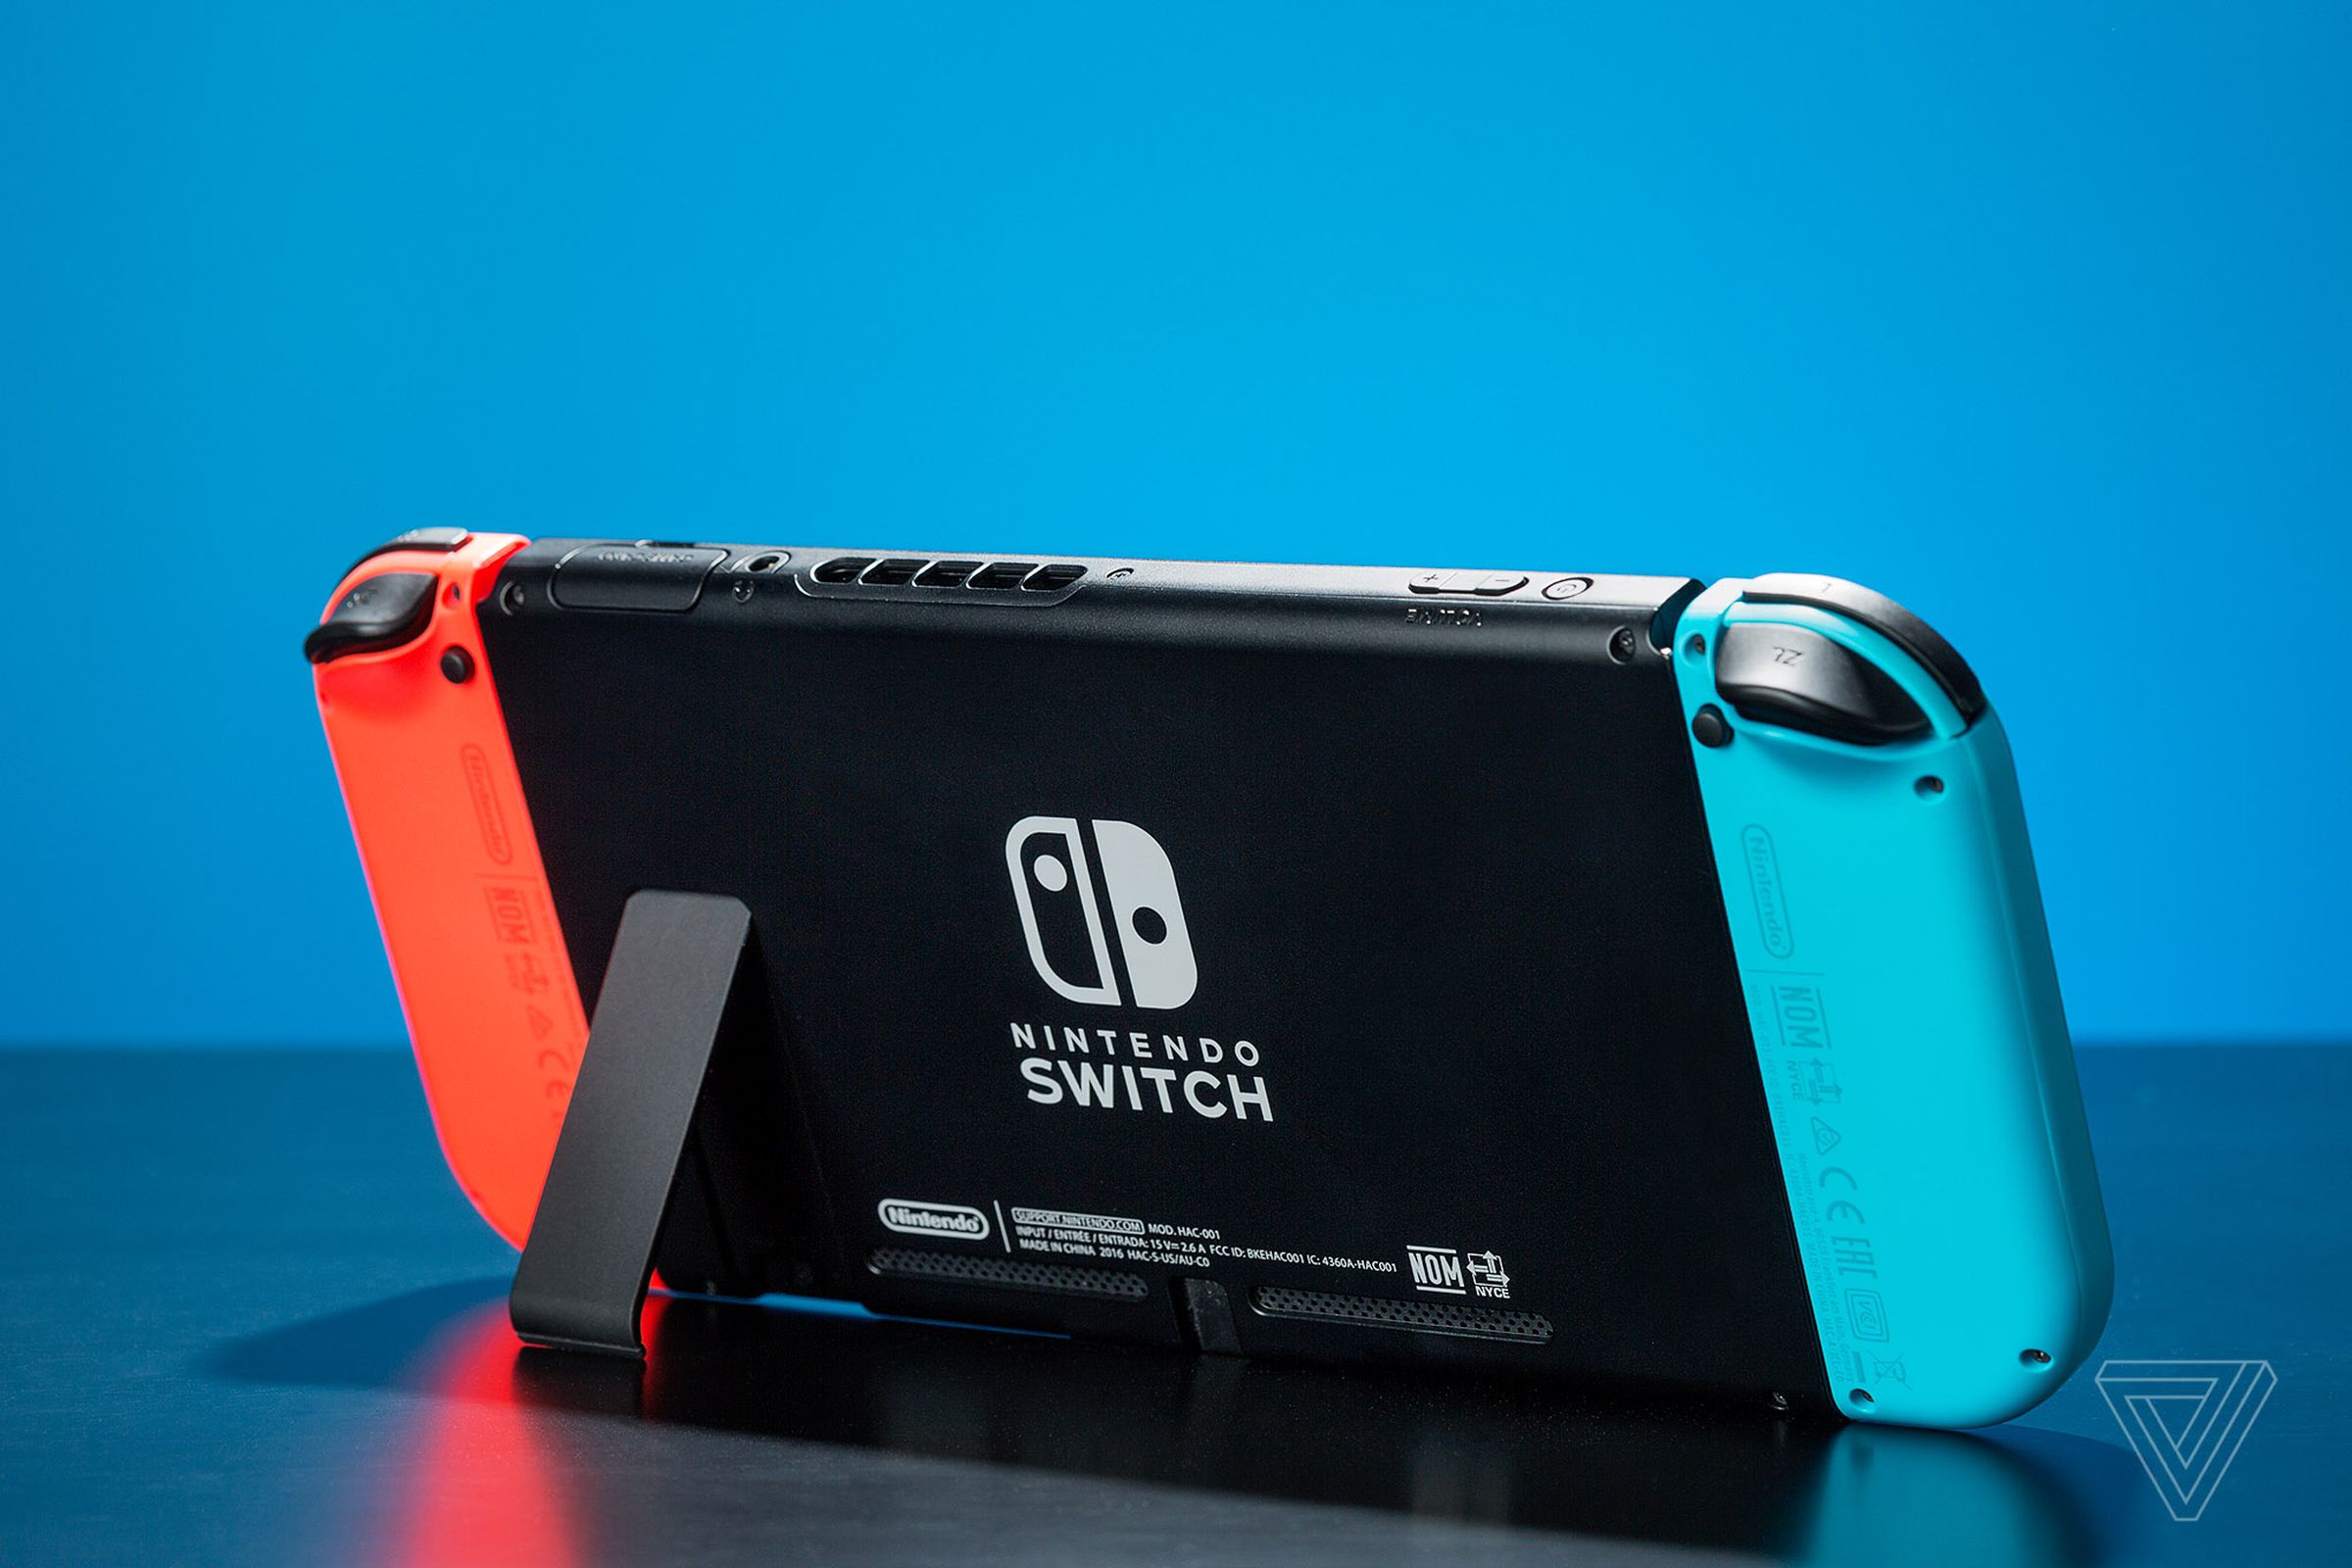 An image of a Nintendo Switch on a table with its kickstand extended.